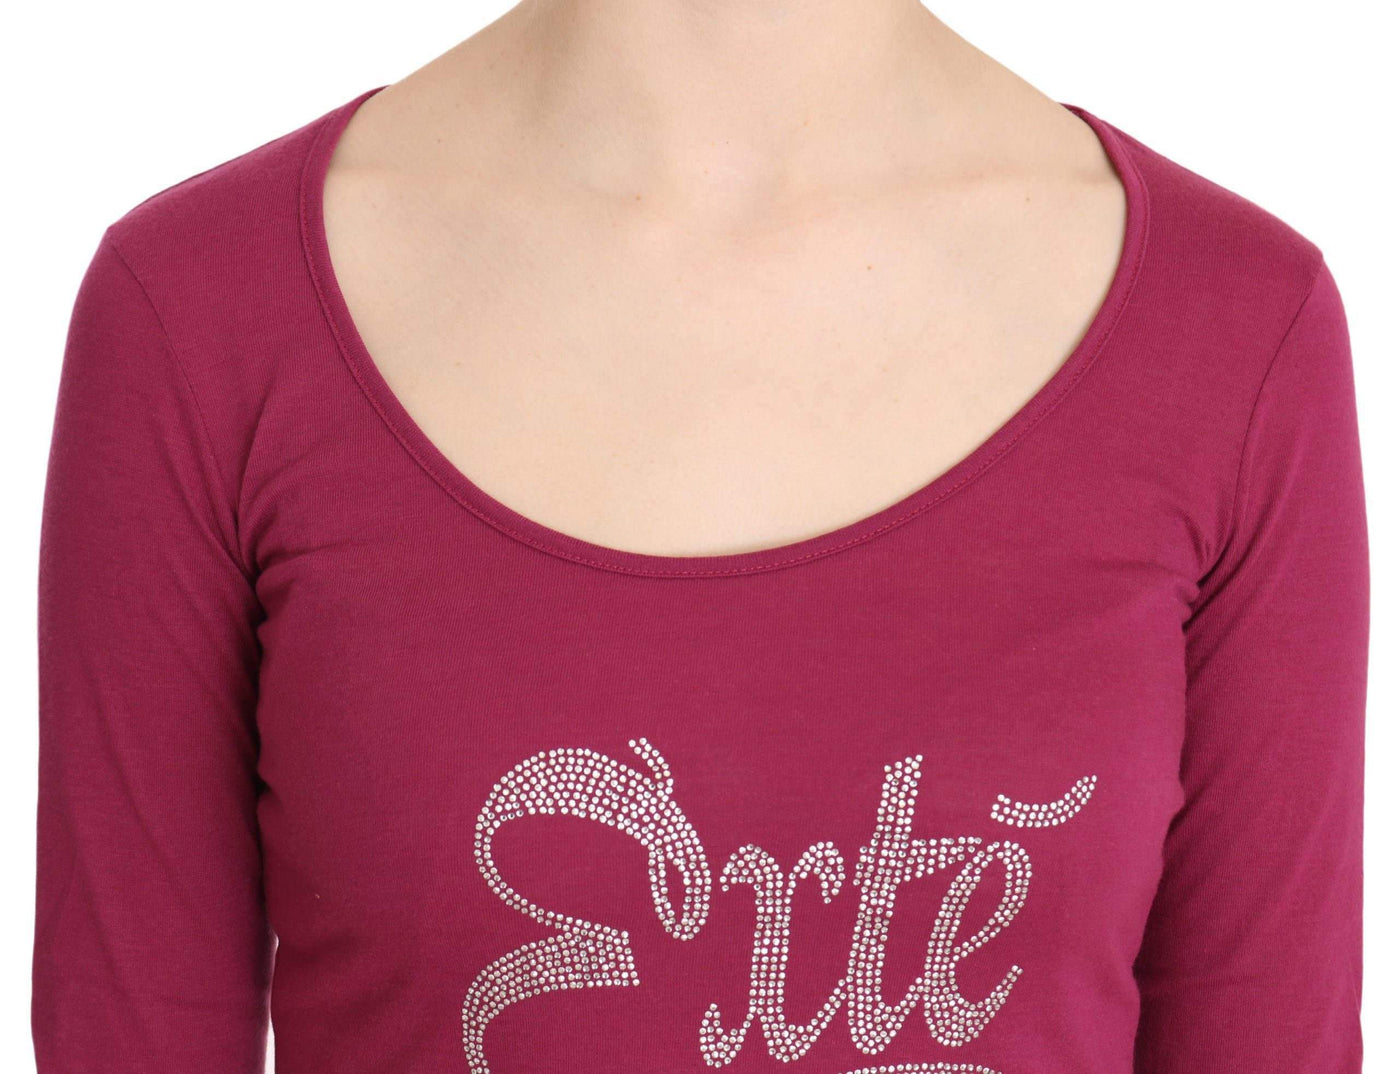 Exte   Crystal Embellished Long Sleeve Top #women, Catch, Exte, feed-agegroup-adult, feed-color-pink, feed-gender-female, feed-size-IT40|S, feed-size-IT42|M, feed-size-IT44|L, Gender_Women, IT40|S, IT42|M, IT44|L, Kogan, Pink, Tops & T-Shirts - Women - Clothing, Women - New Arrivals at SEYMAYKA